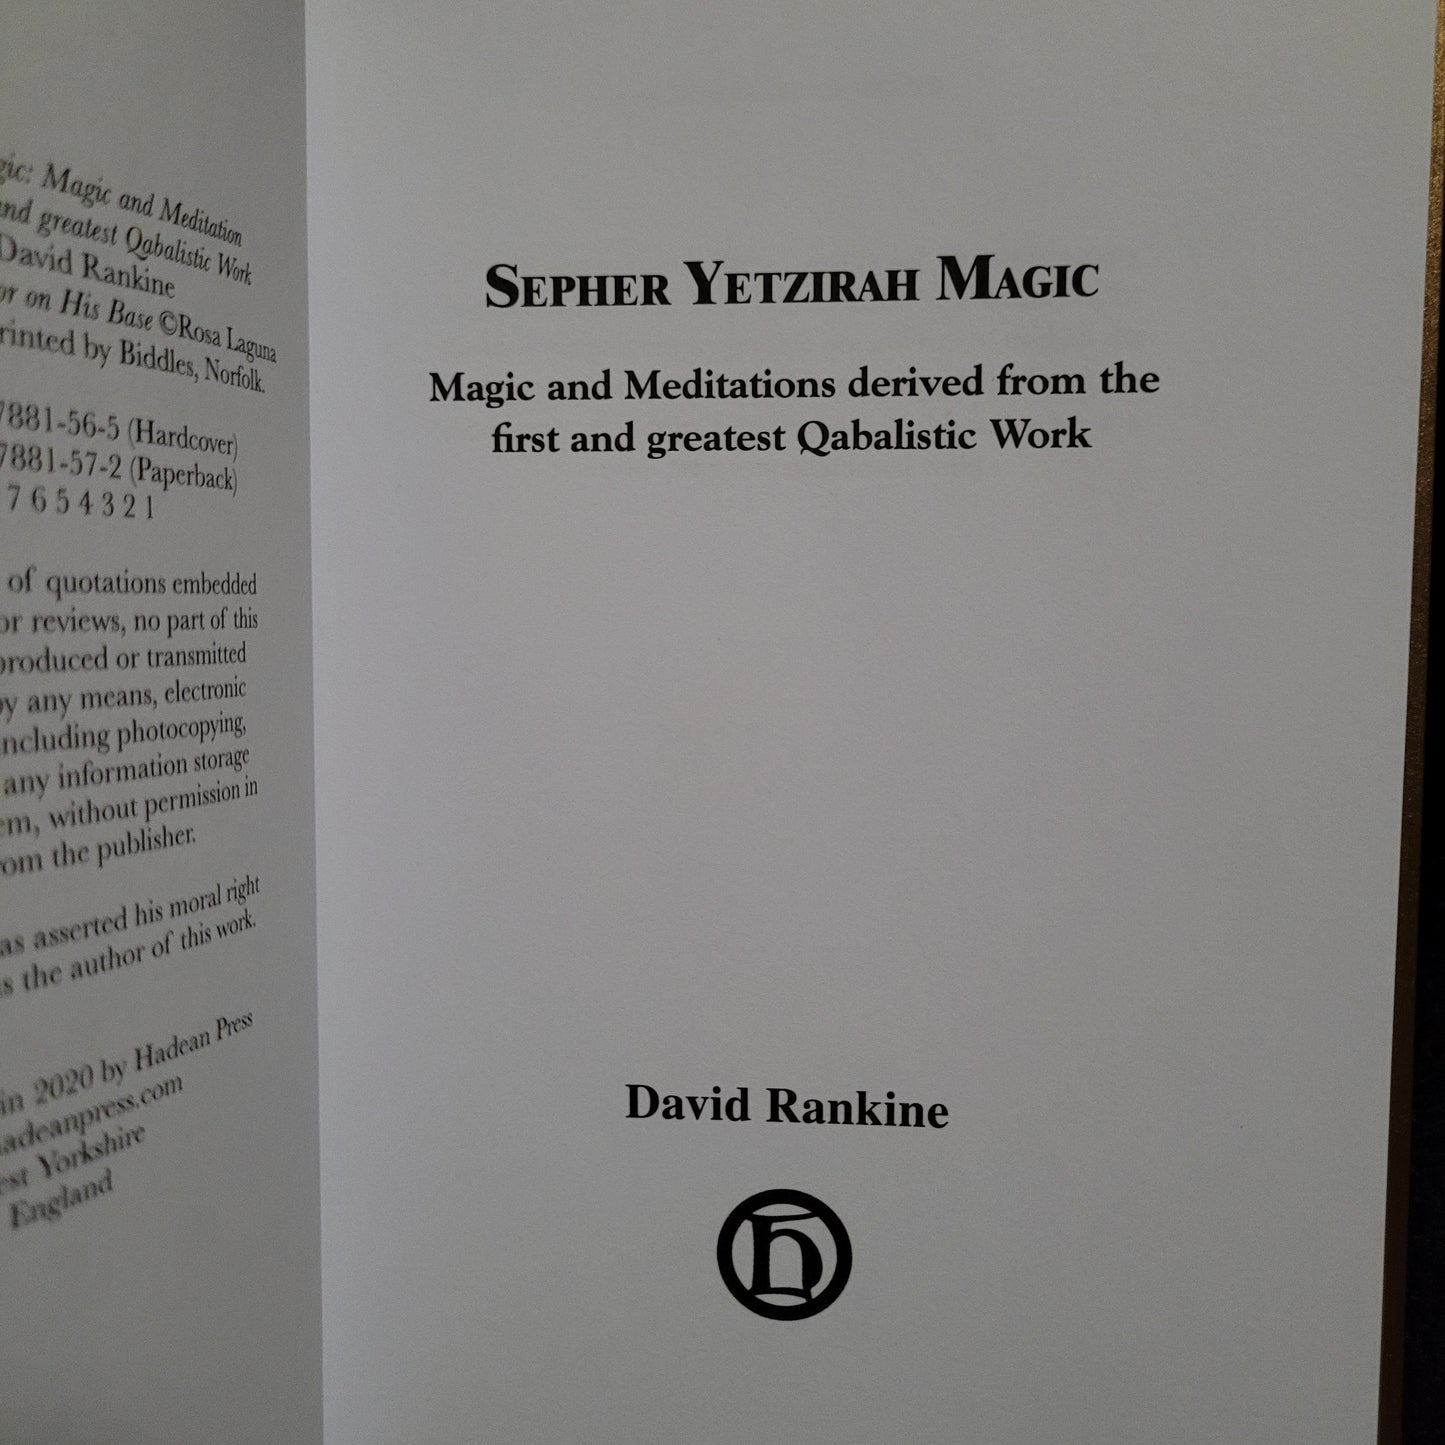 Sepher Yetzirah Magic: Magic and Meditations derived from the first and greatest Qabalistic Work by David Rankine (Hadean Press, 2020) Limited Edition Hardcover